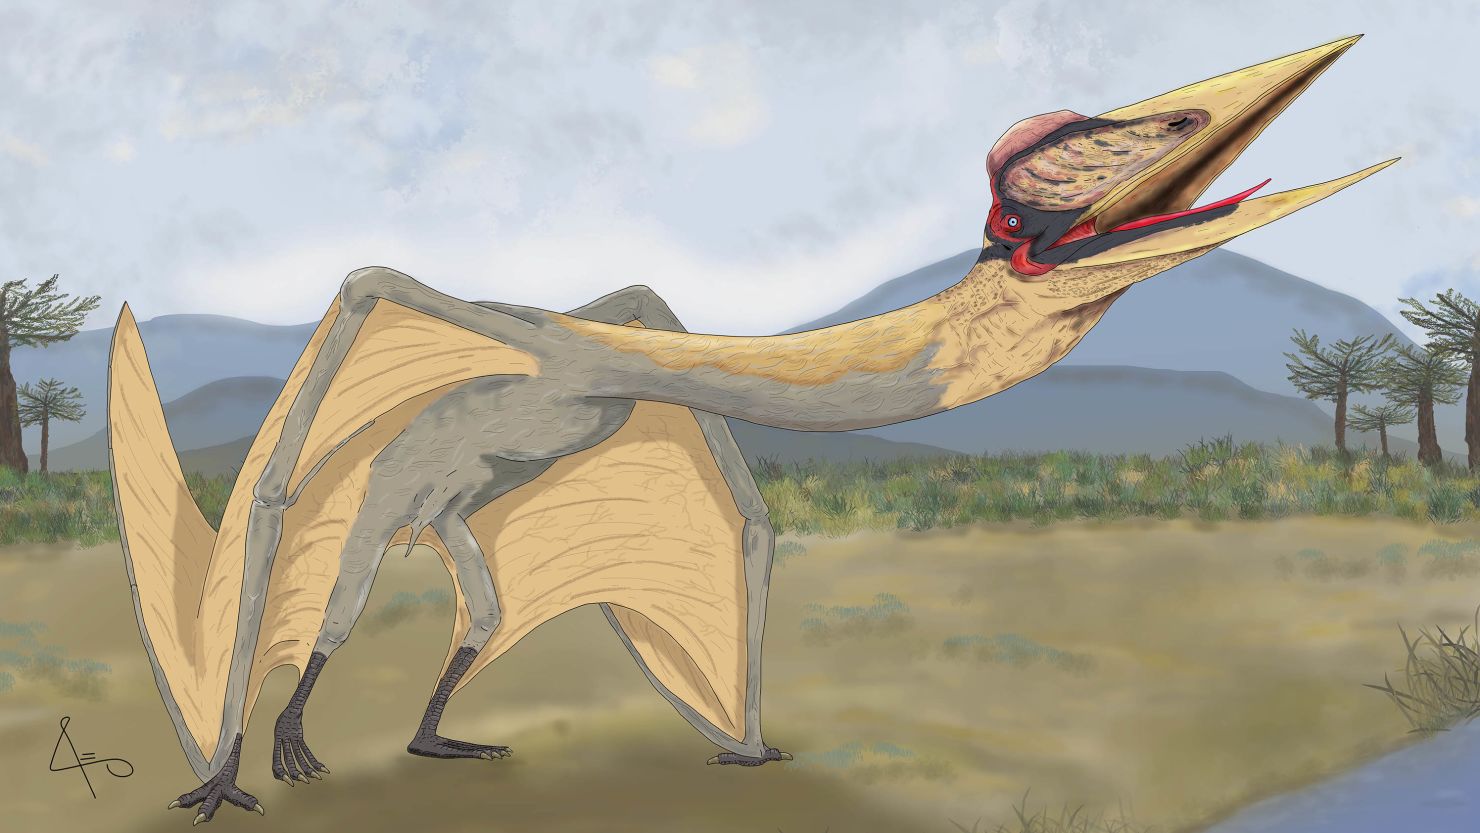 Scientists unearthed the largest pterosaur ever found in South America.